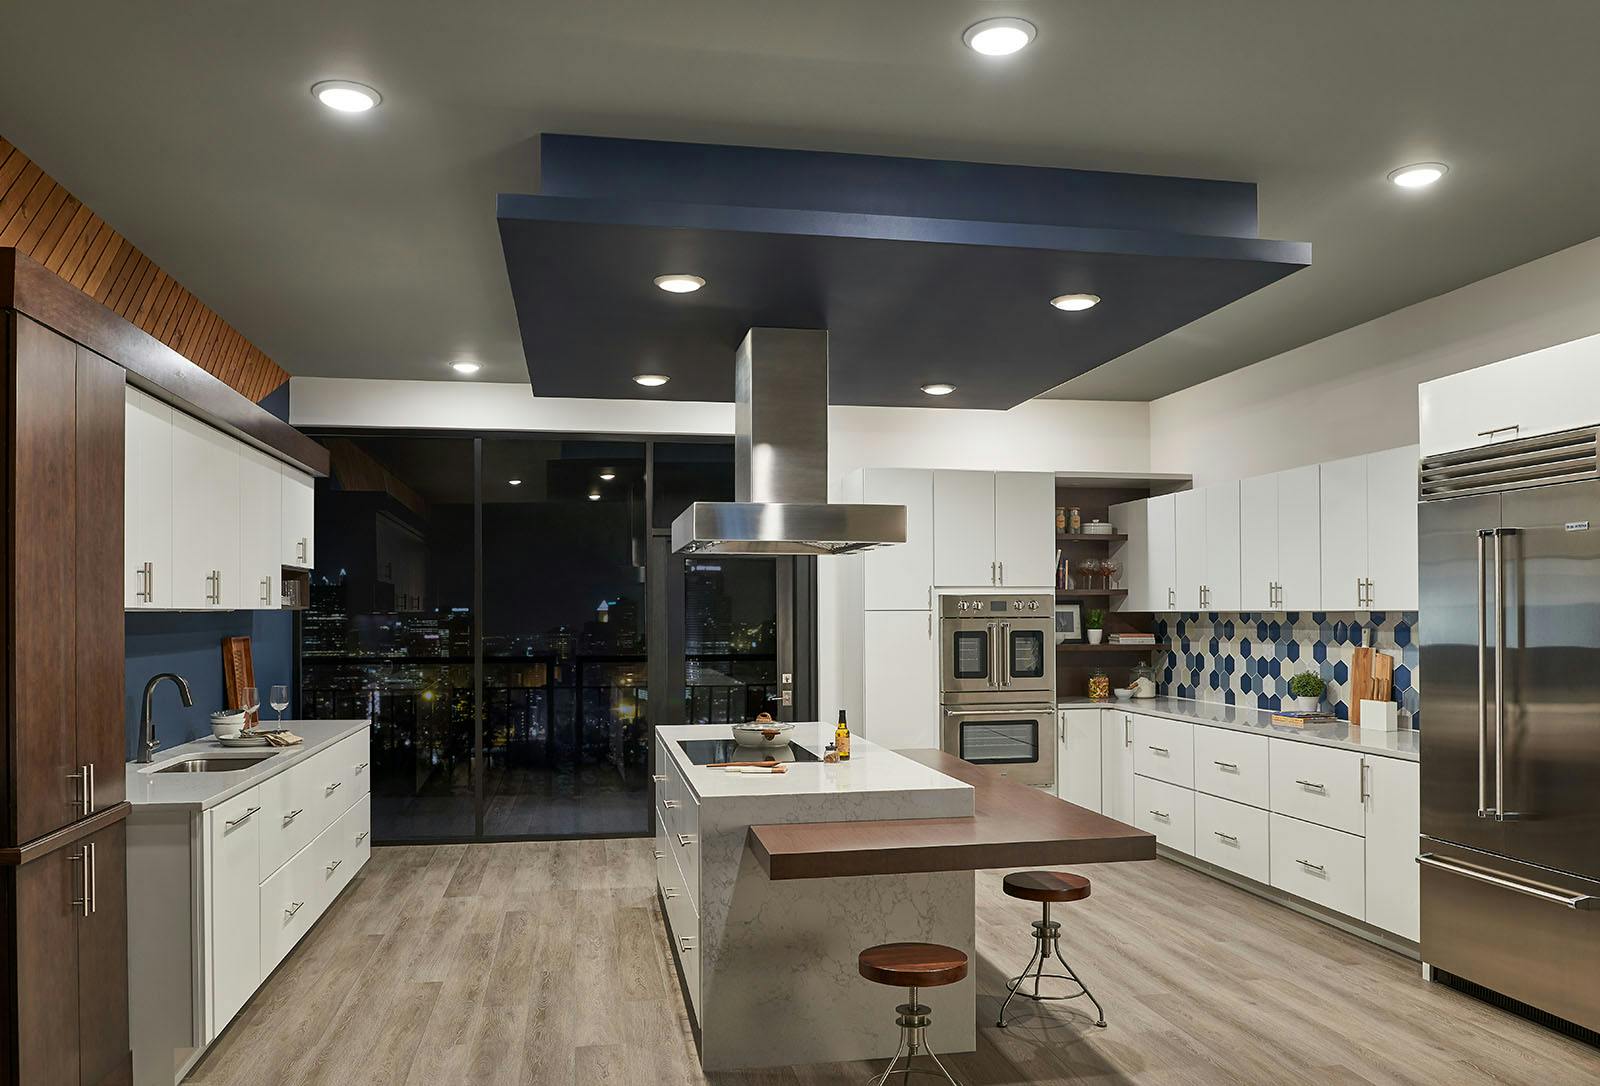 Modern white kitchen with blue, wood, and stainless steel accents in an urban setting with only downlights turned on